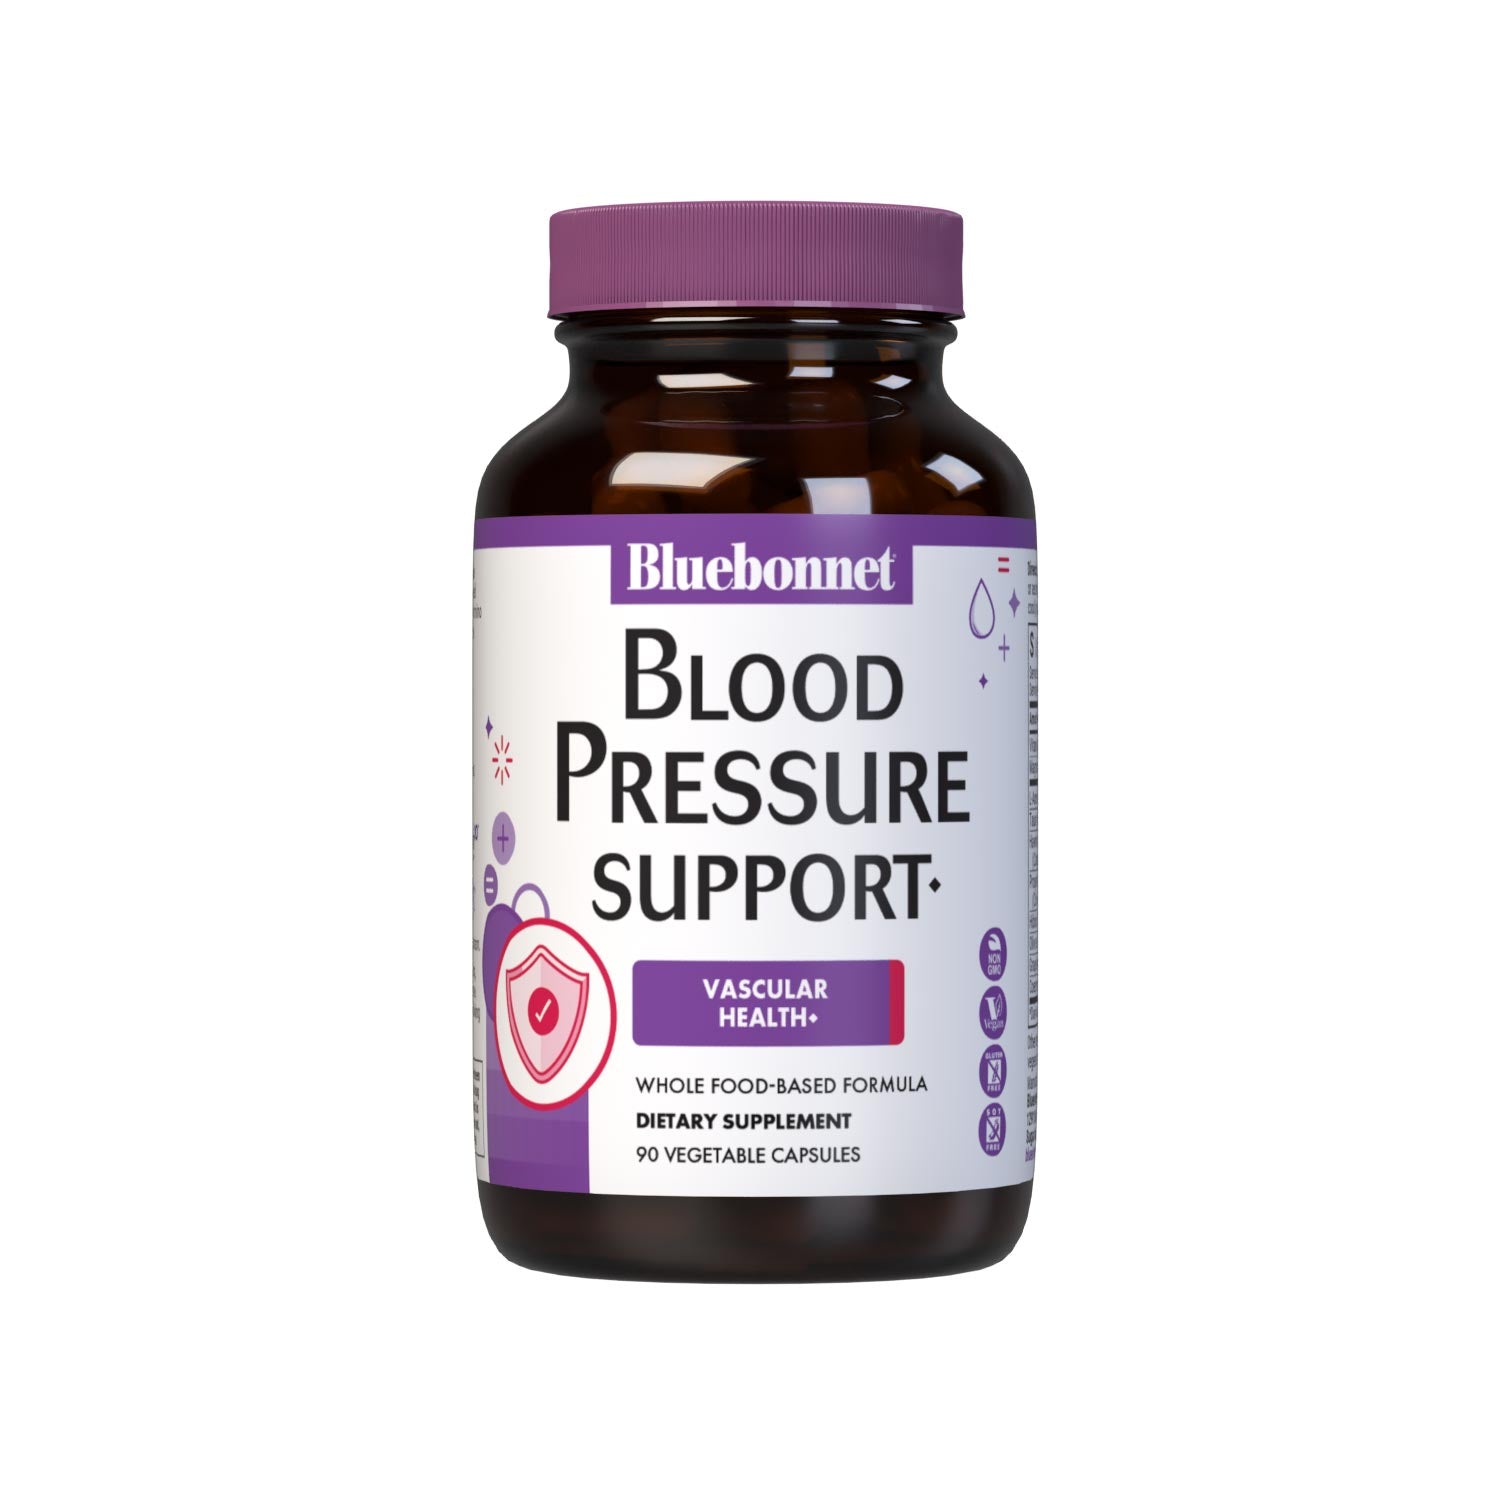 Bluebonnet’s Targeted Choice Blood Pressure Support 60 Vegetable Capsules are specially formulated with a unique blend of sustainably harvested or wildcrafted herbal/botanical extracts, the amino acids arginine and taurine, along with grape seed extract and CoQ10 to help support blood pressure levels that are already within the normal range.  #size_90 count